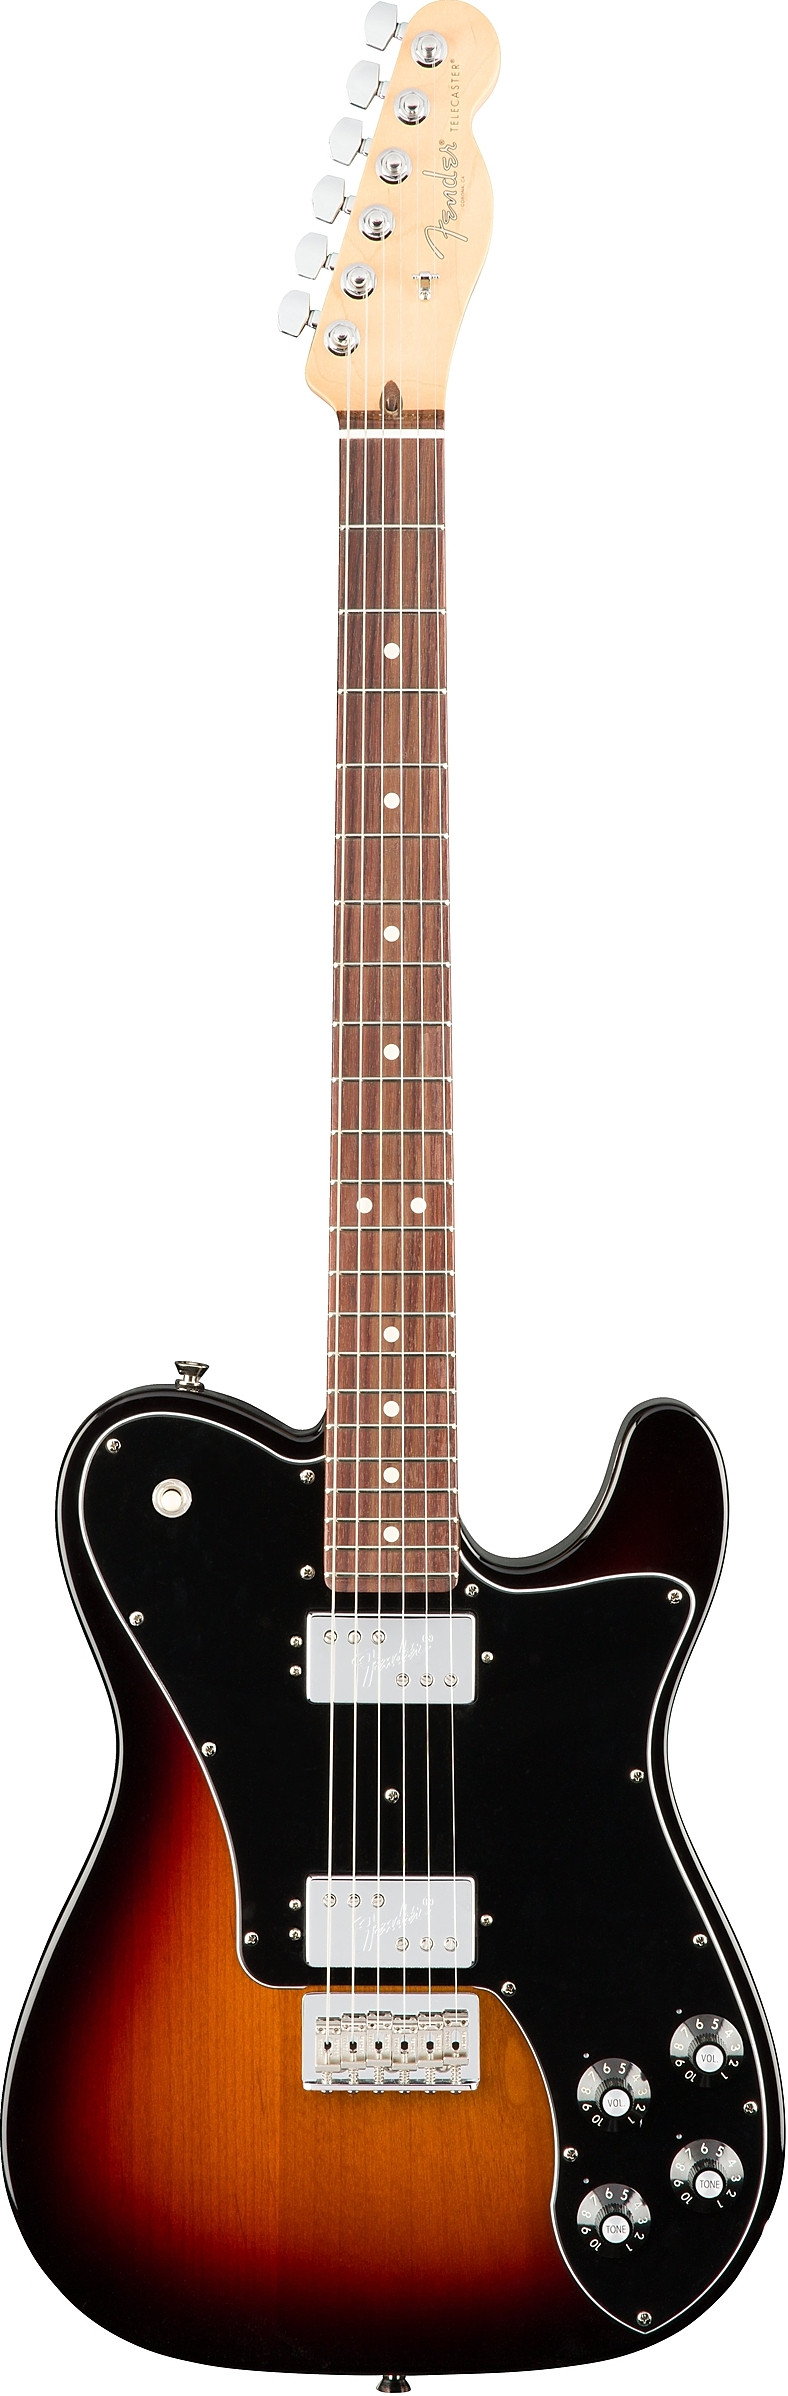 Fender American Professional Telecaster Deluxe Shawbucker Review 